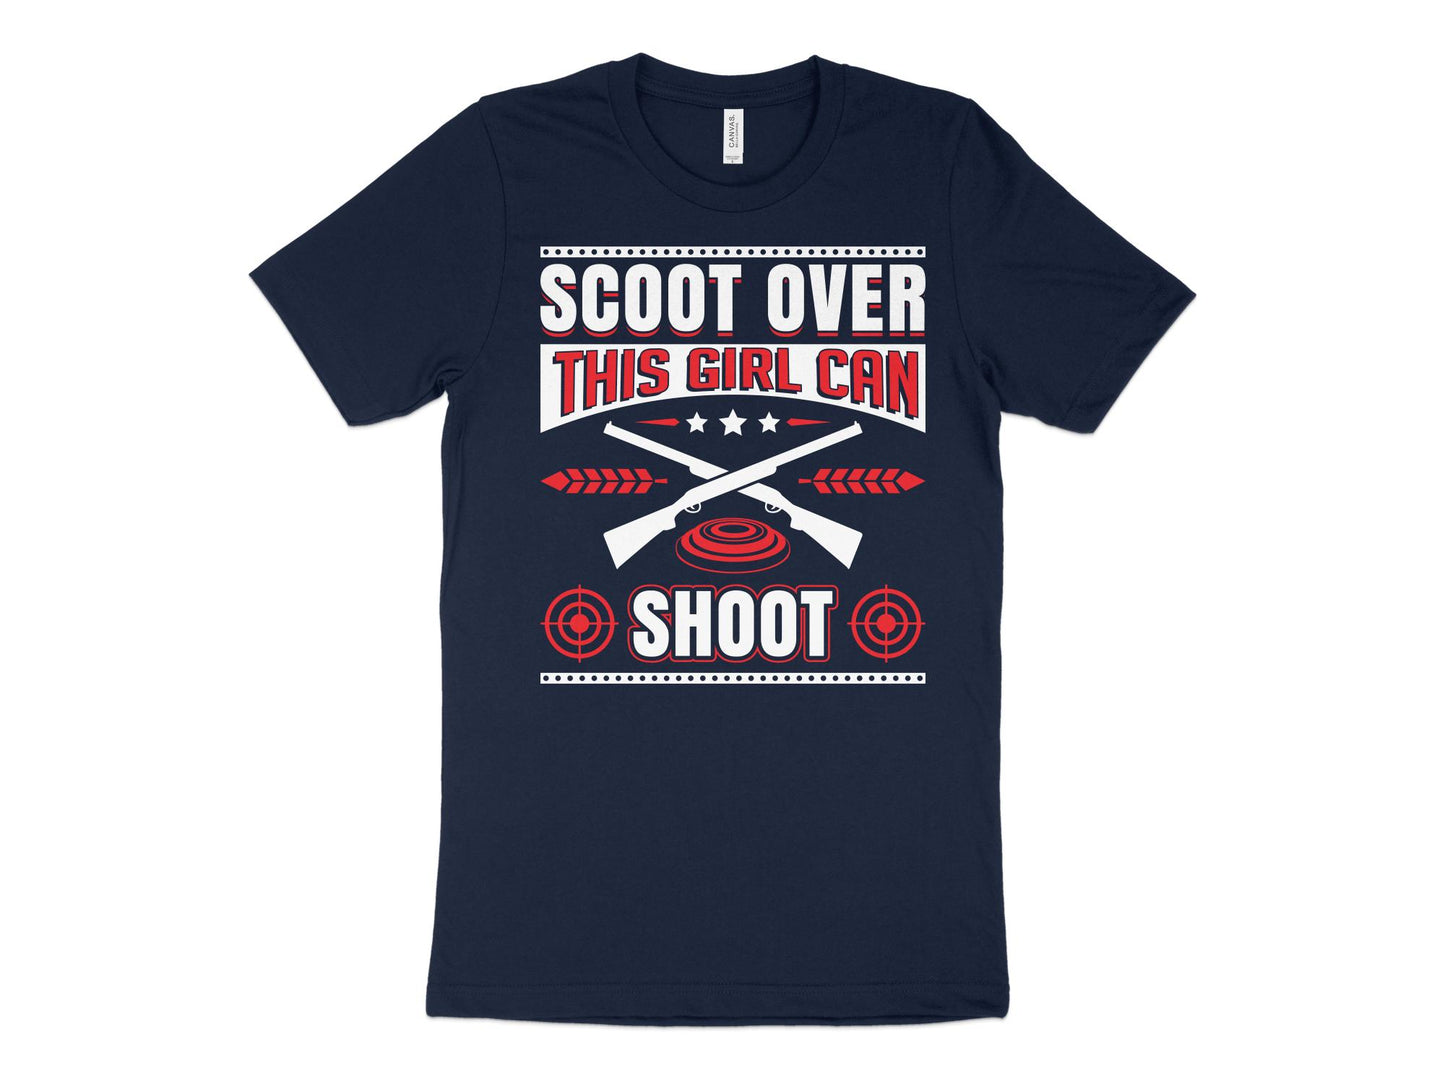 Trap Shooting Shirt - Scoot Over This Girl Can Shoot, navy blue